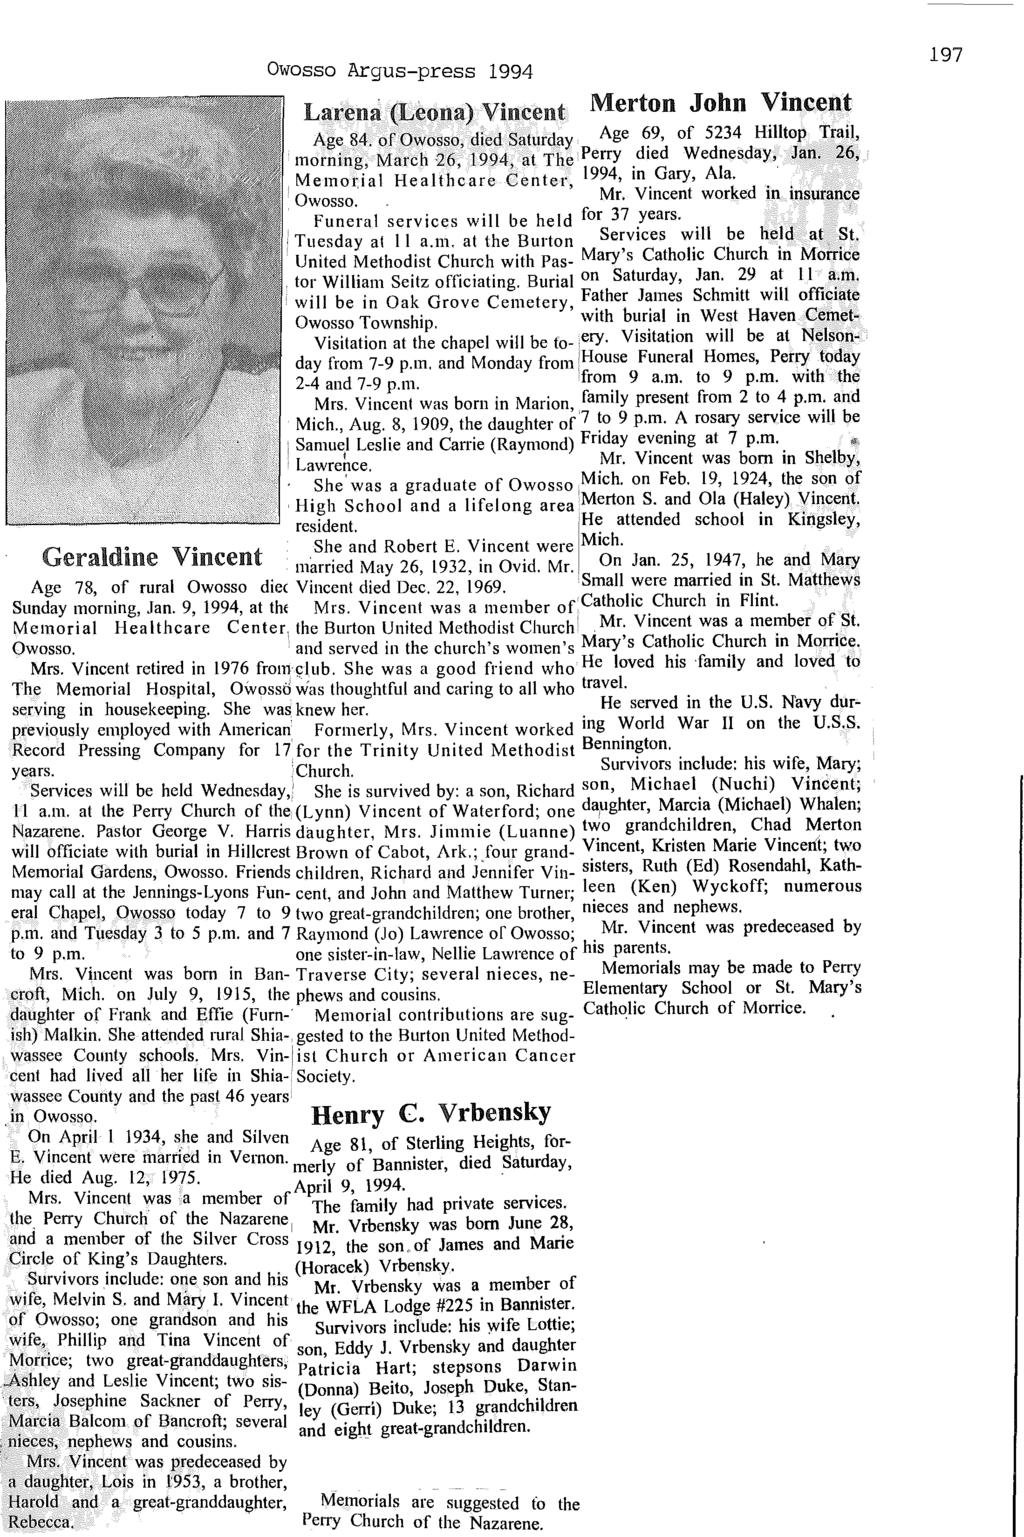 Geraldine Vincent 'i Owosso Argus-press 1994 Larena (Leona) Vincent Merton John Vincent. Age 84. of Owosso, died Saturday Age ~9, of 5234 Hilltop Trail" morning, March Q6, 1994, at The Perry.